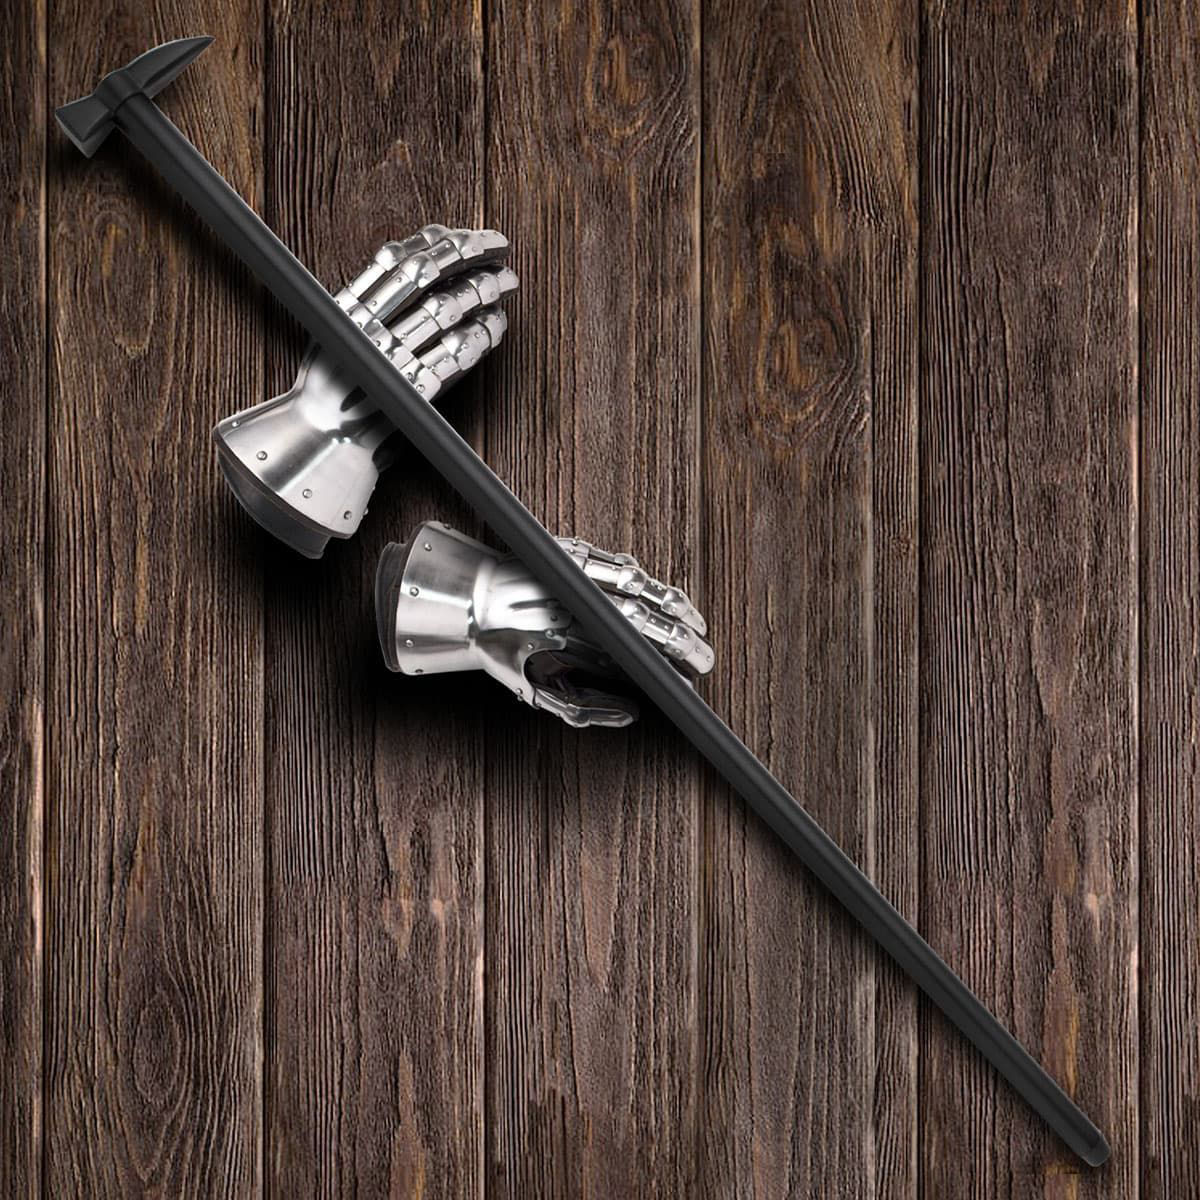 Medieval-style war hammer tops this lightweight cane with a black Beechwood shaft, rubber tip to protect floors